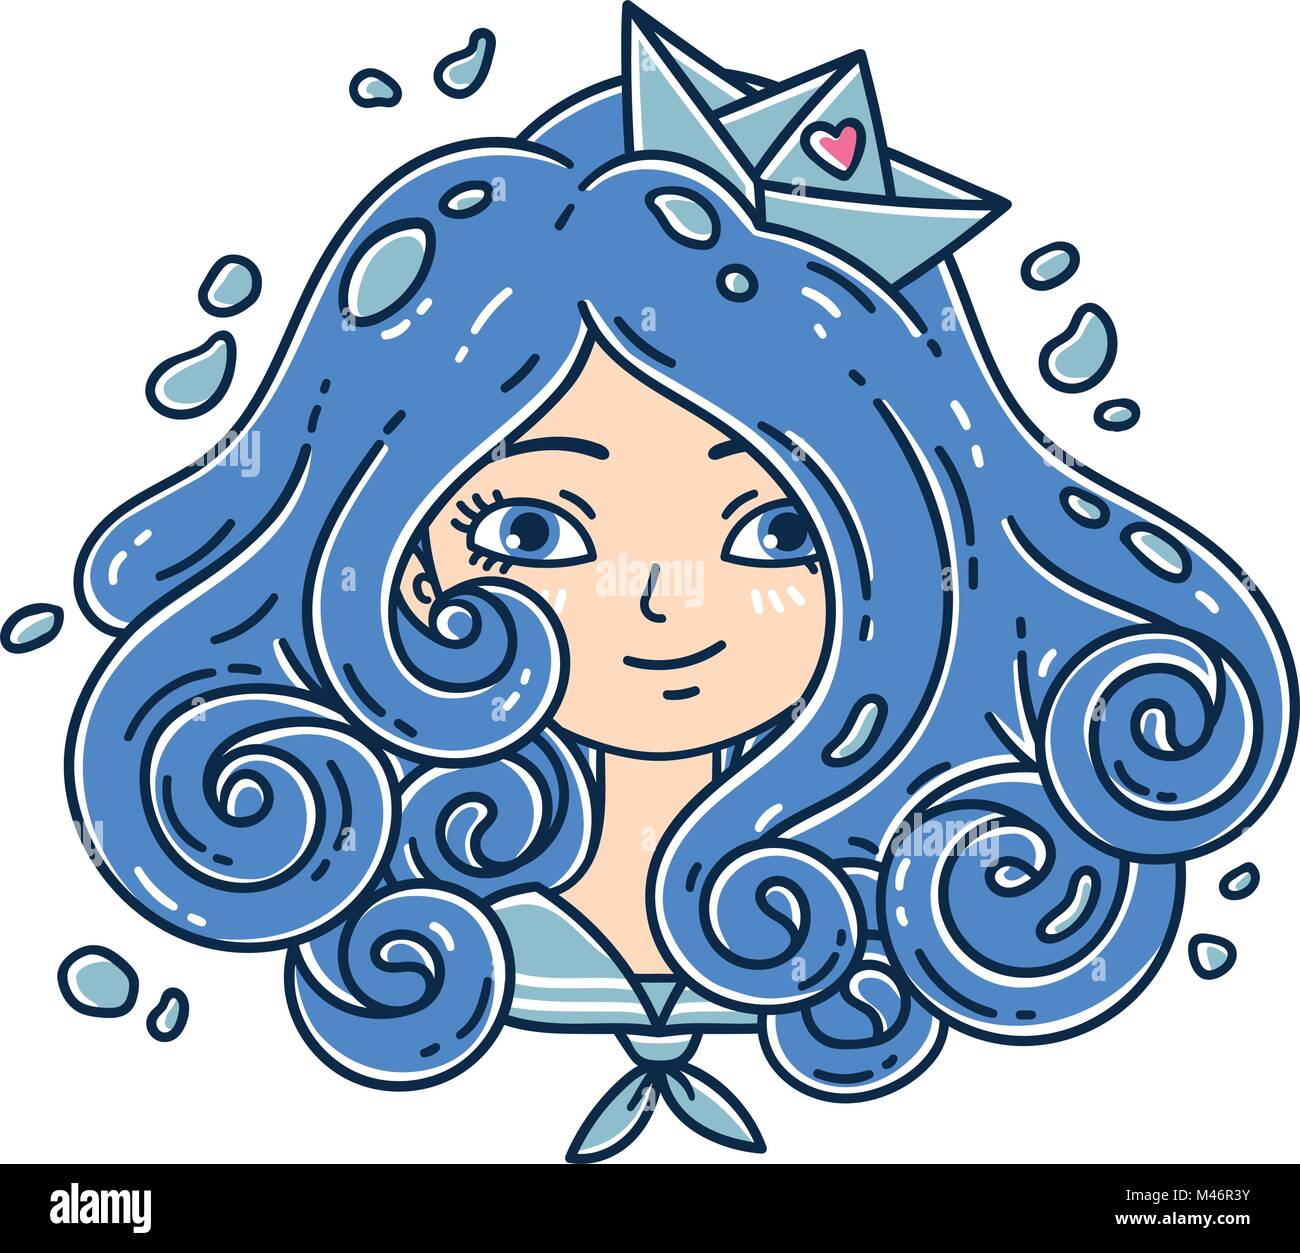 Girl with curly hair. Sea girl. Girl with blue hair. Paper boat. Isolated objects on white background. Vector illustration. Stock Vector